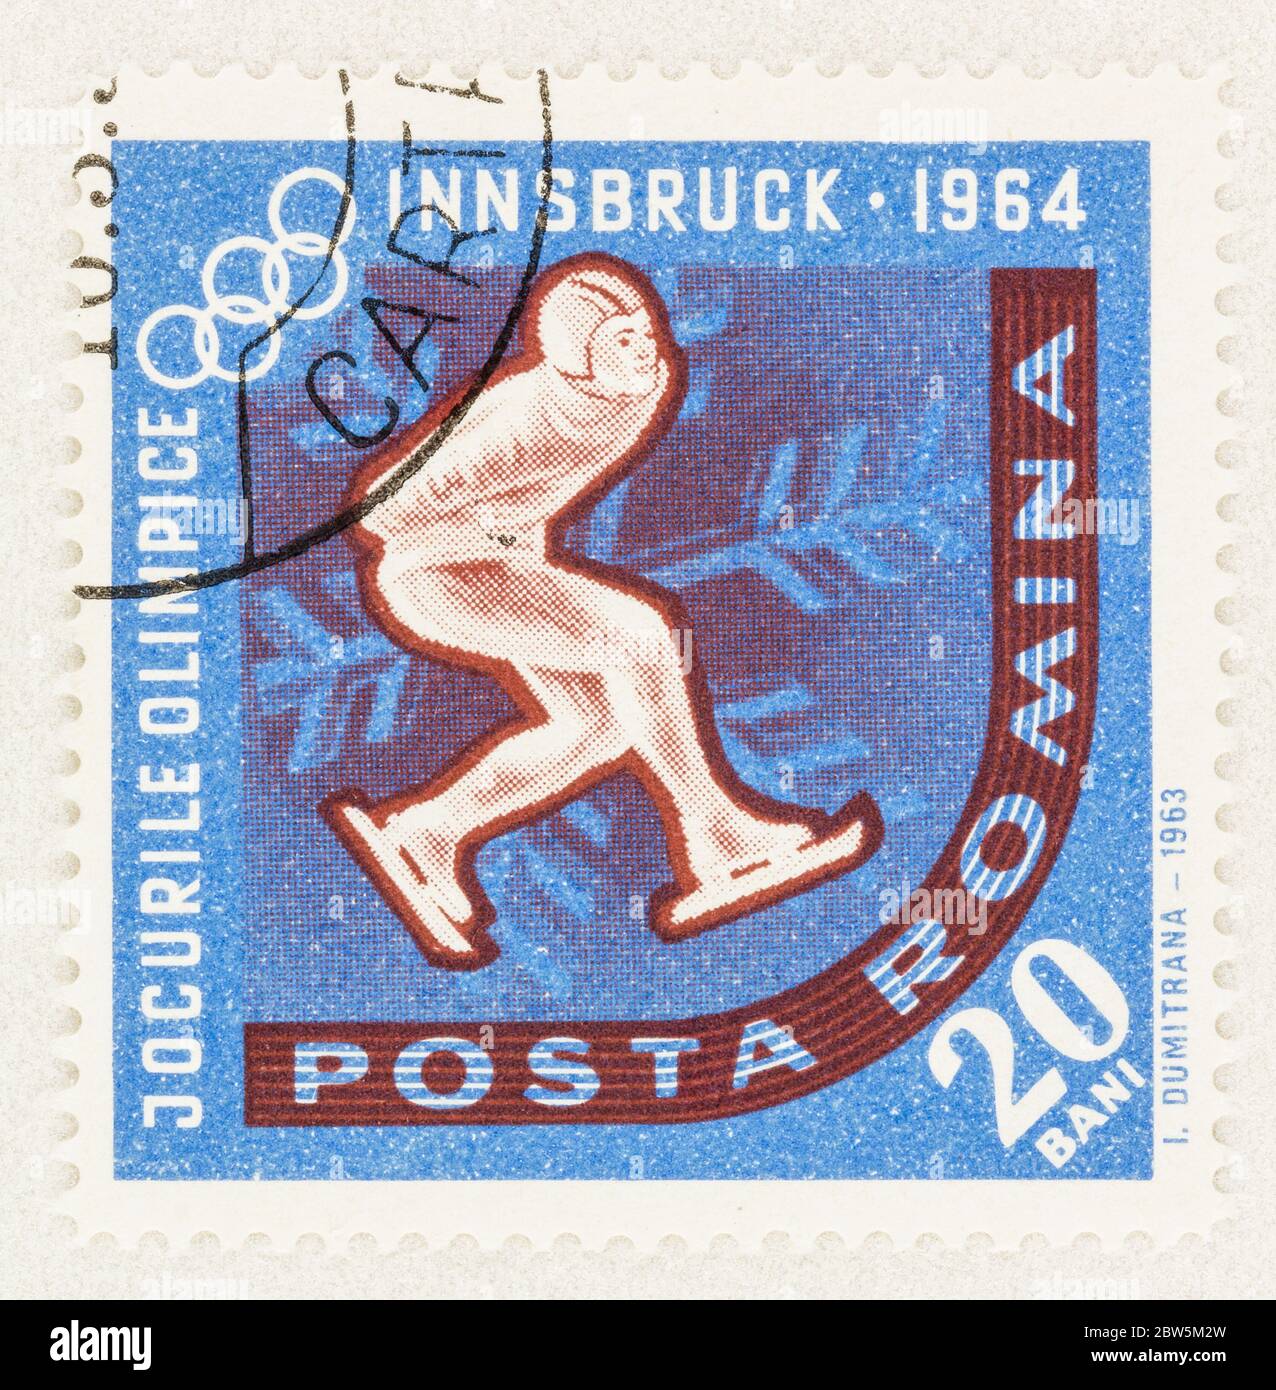 SEATTLE WASHINGTON - May 27, 2020:  Speed skater on 1963 Romanian stamp, commemorating the 1964 Winter Olympic games in Innsbruck. Scott # 1598 Stock Photo